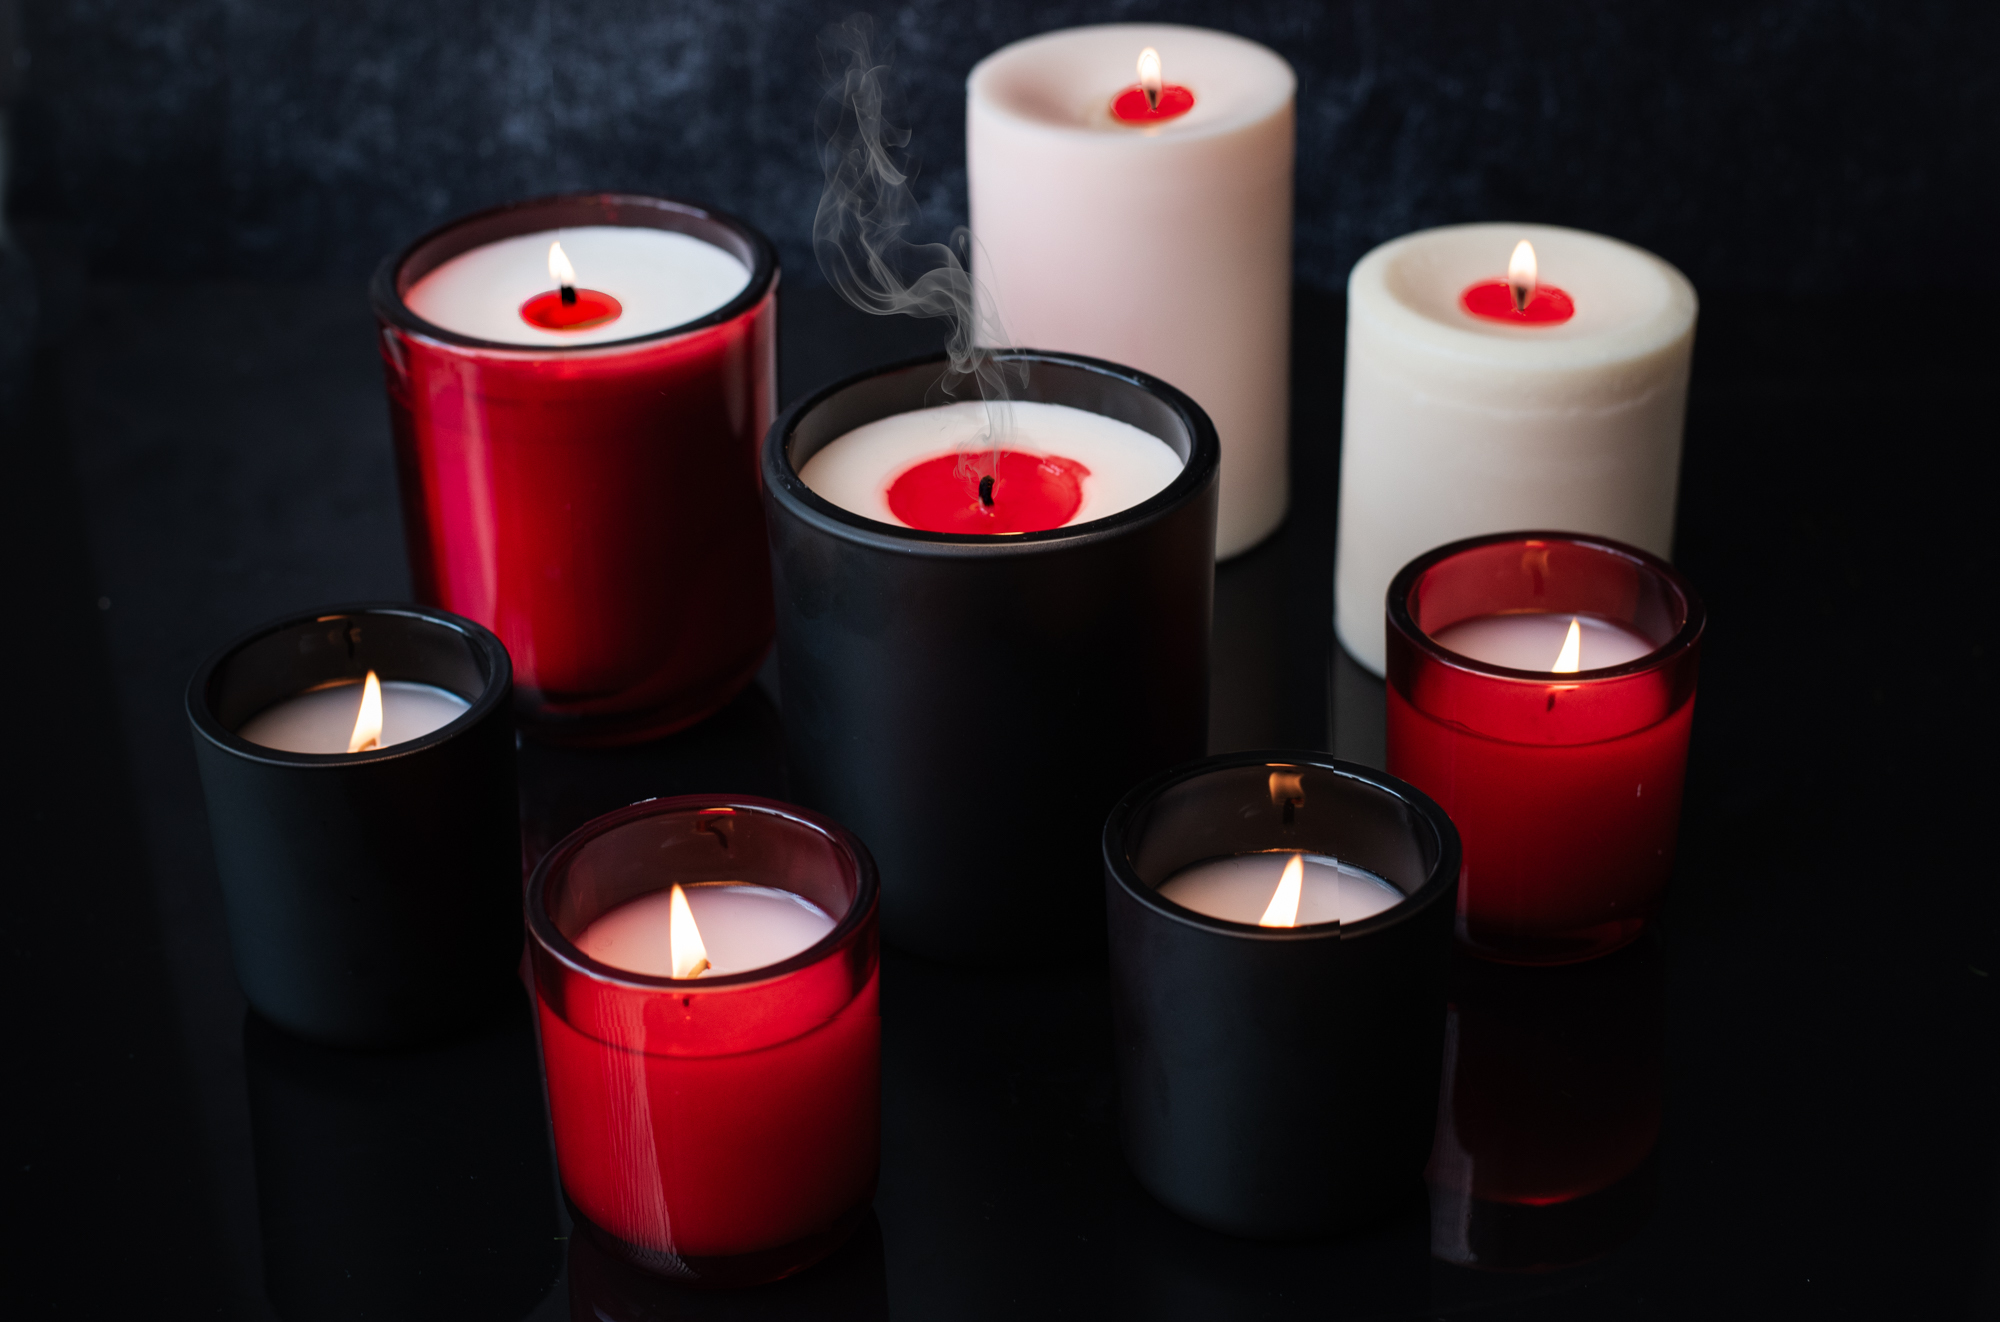 A group of lit candles made in matte black jars, red glass jars, and pillars, some revealing red wax as they burn.